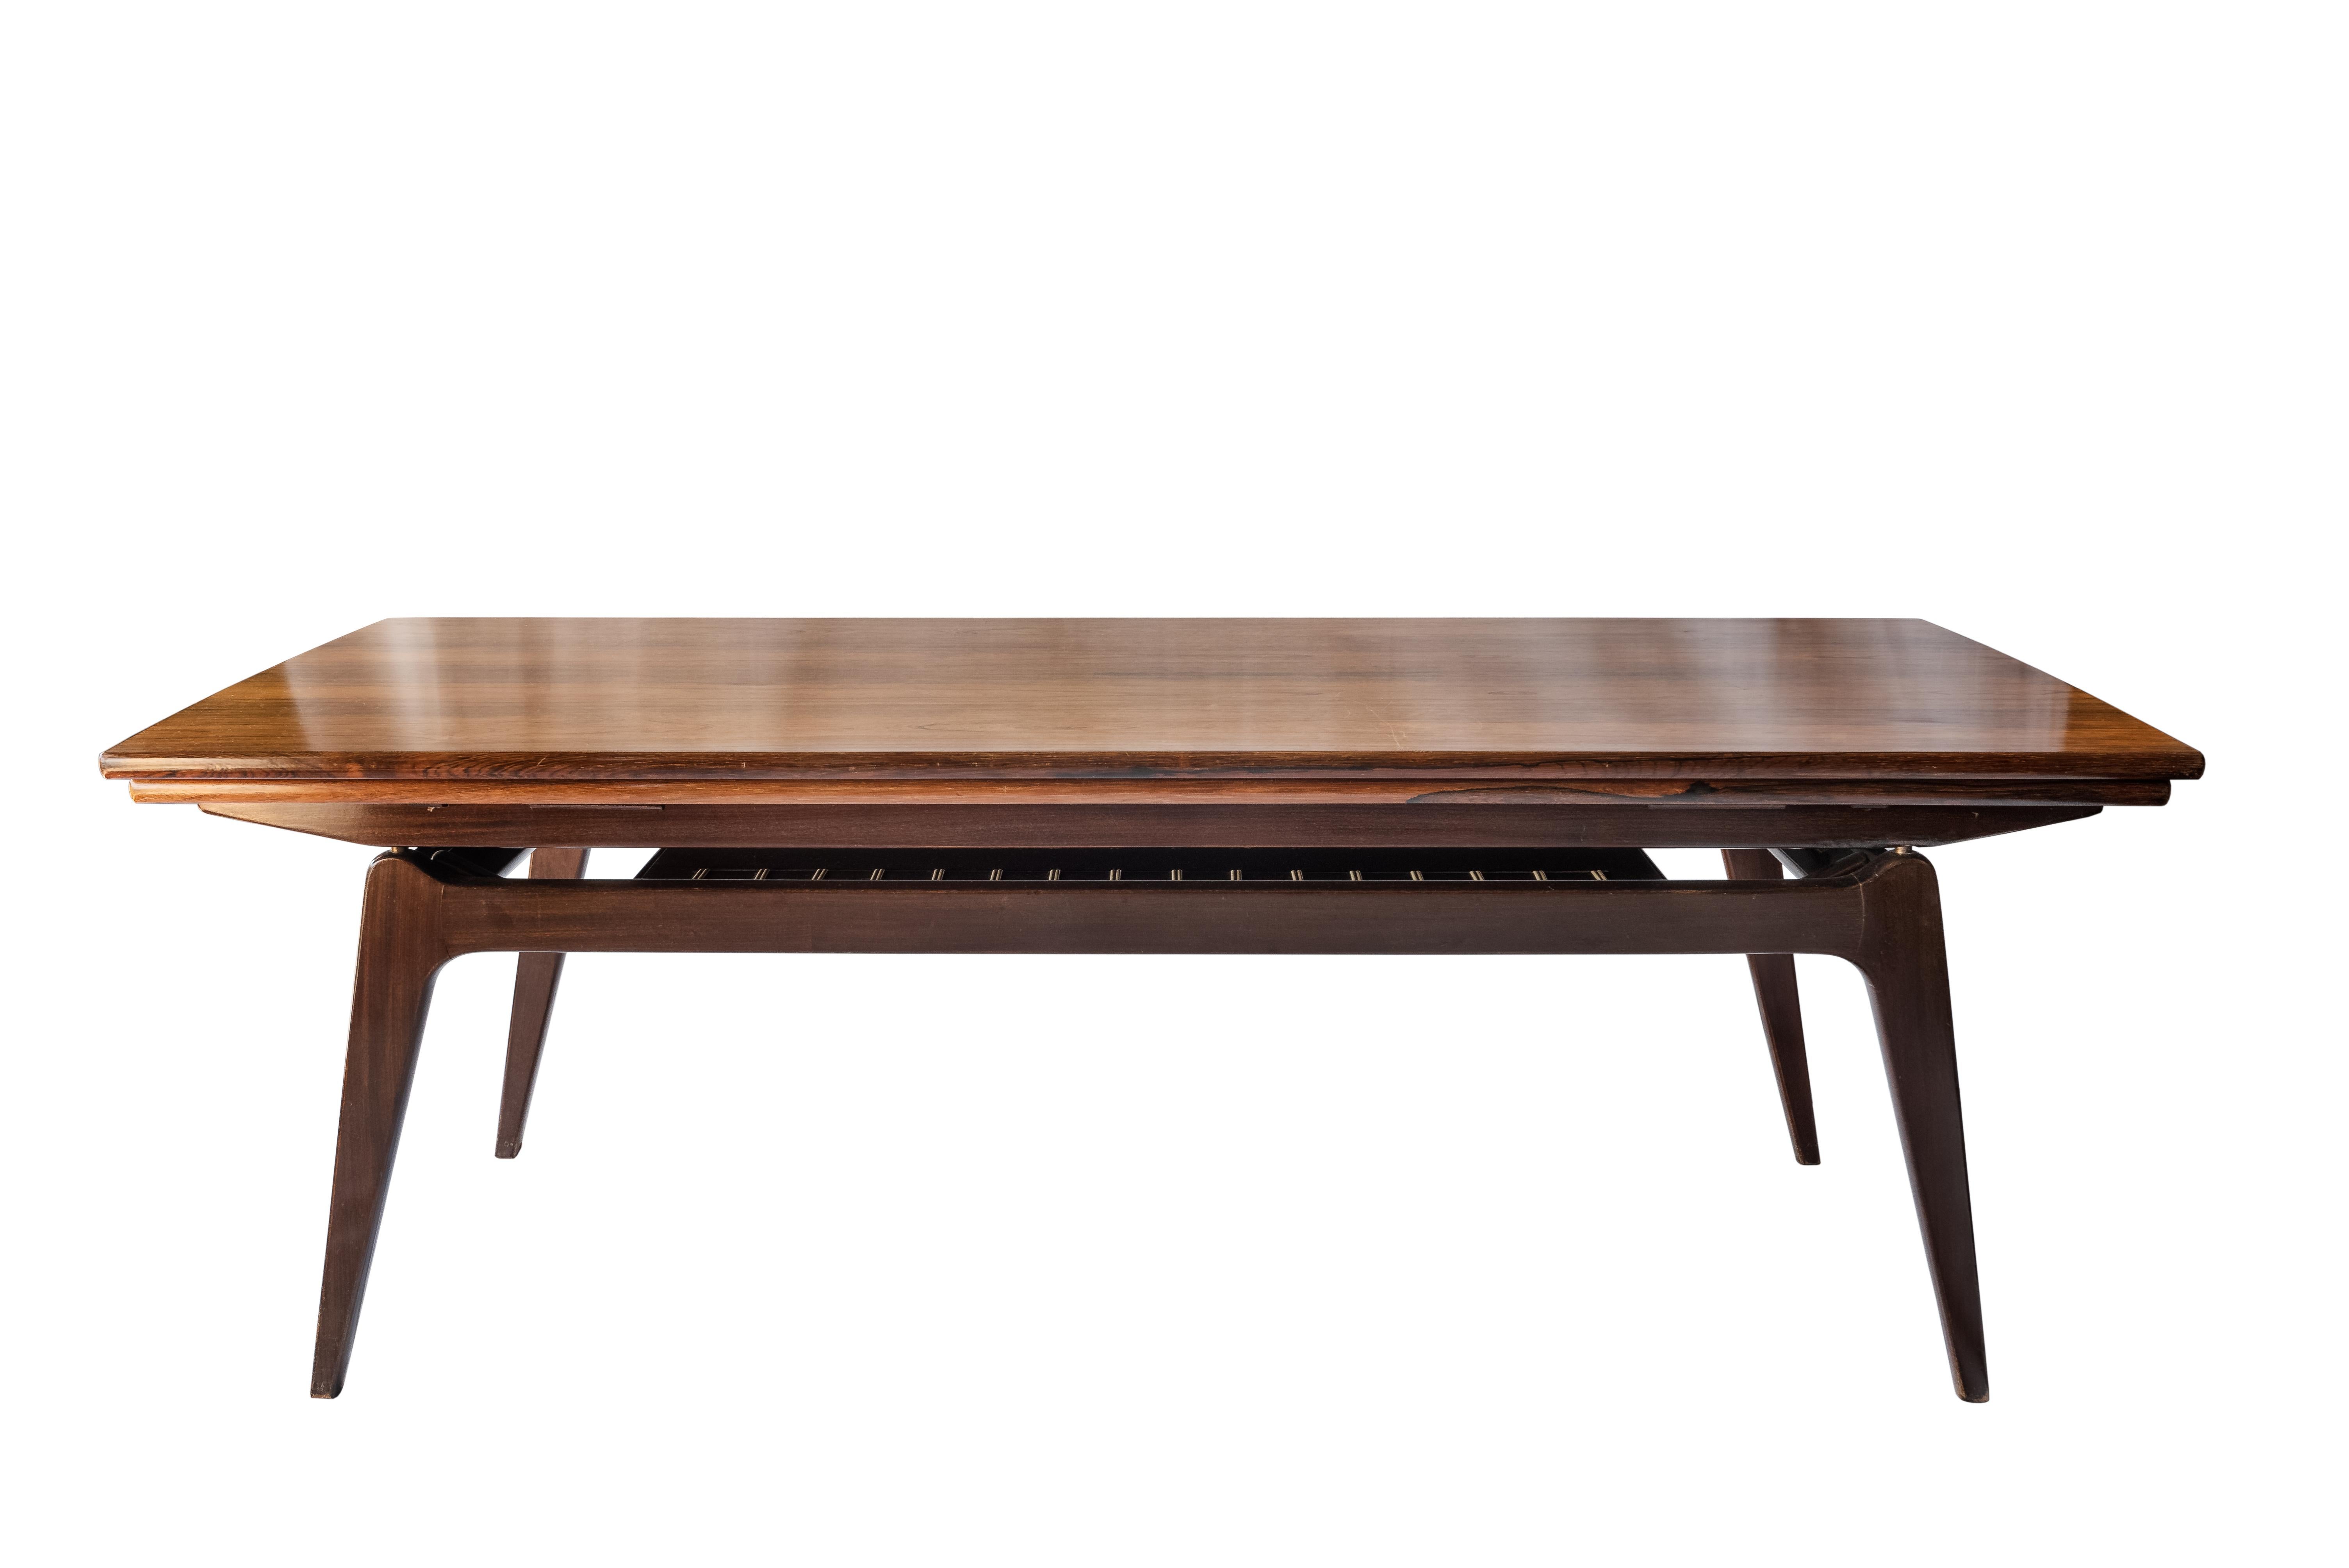 Midcentury Rosewood Metamorphic Elevator Coffee Dinner Table, B. C. Møbler, 1960's

This 1960 rare Danish rosewood coffee table, also known as the Elevator or Metamorphic table was designed to convert into a dining table big enough to seat six